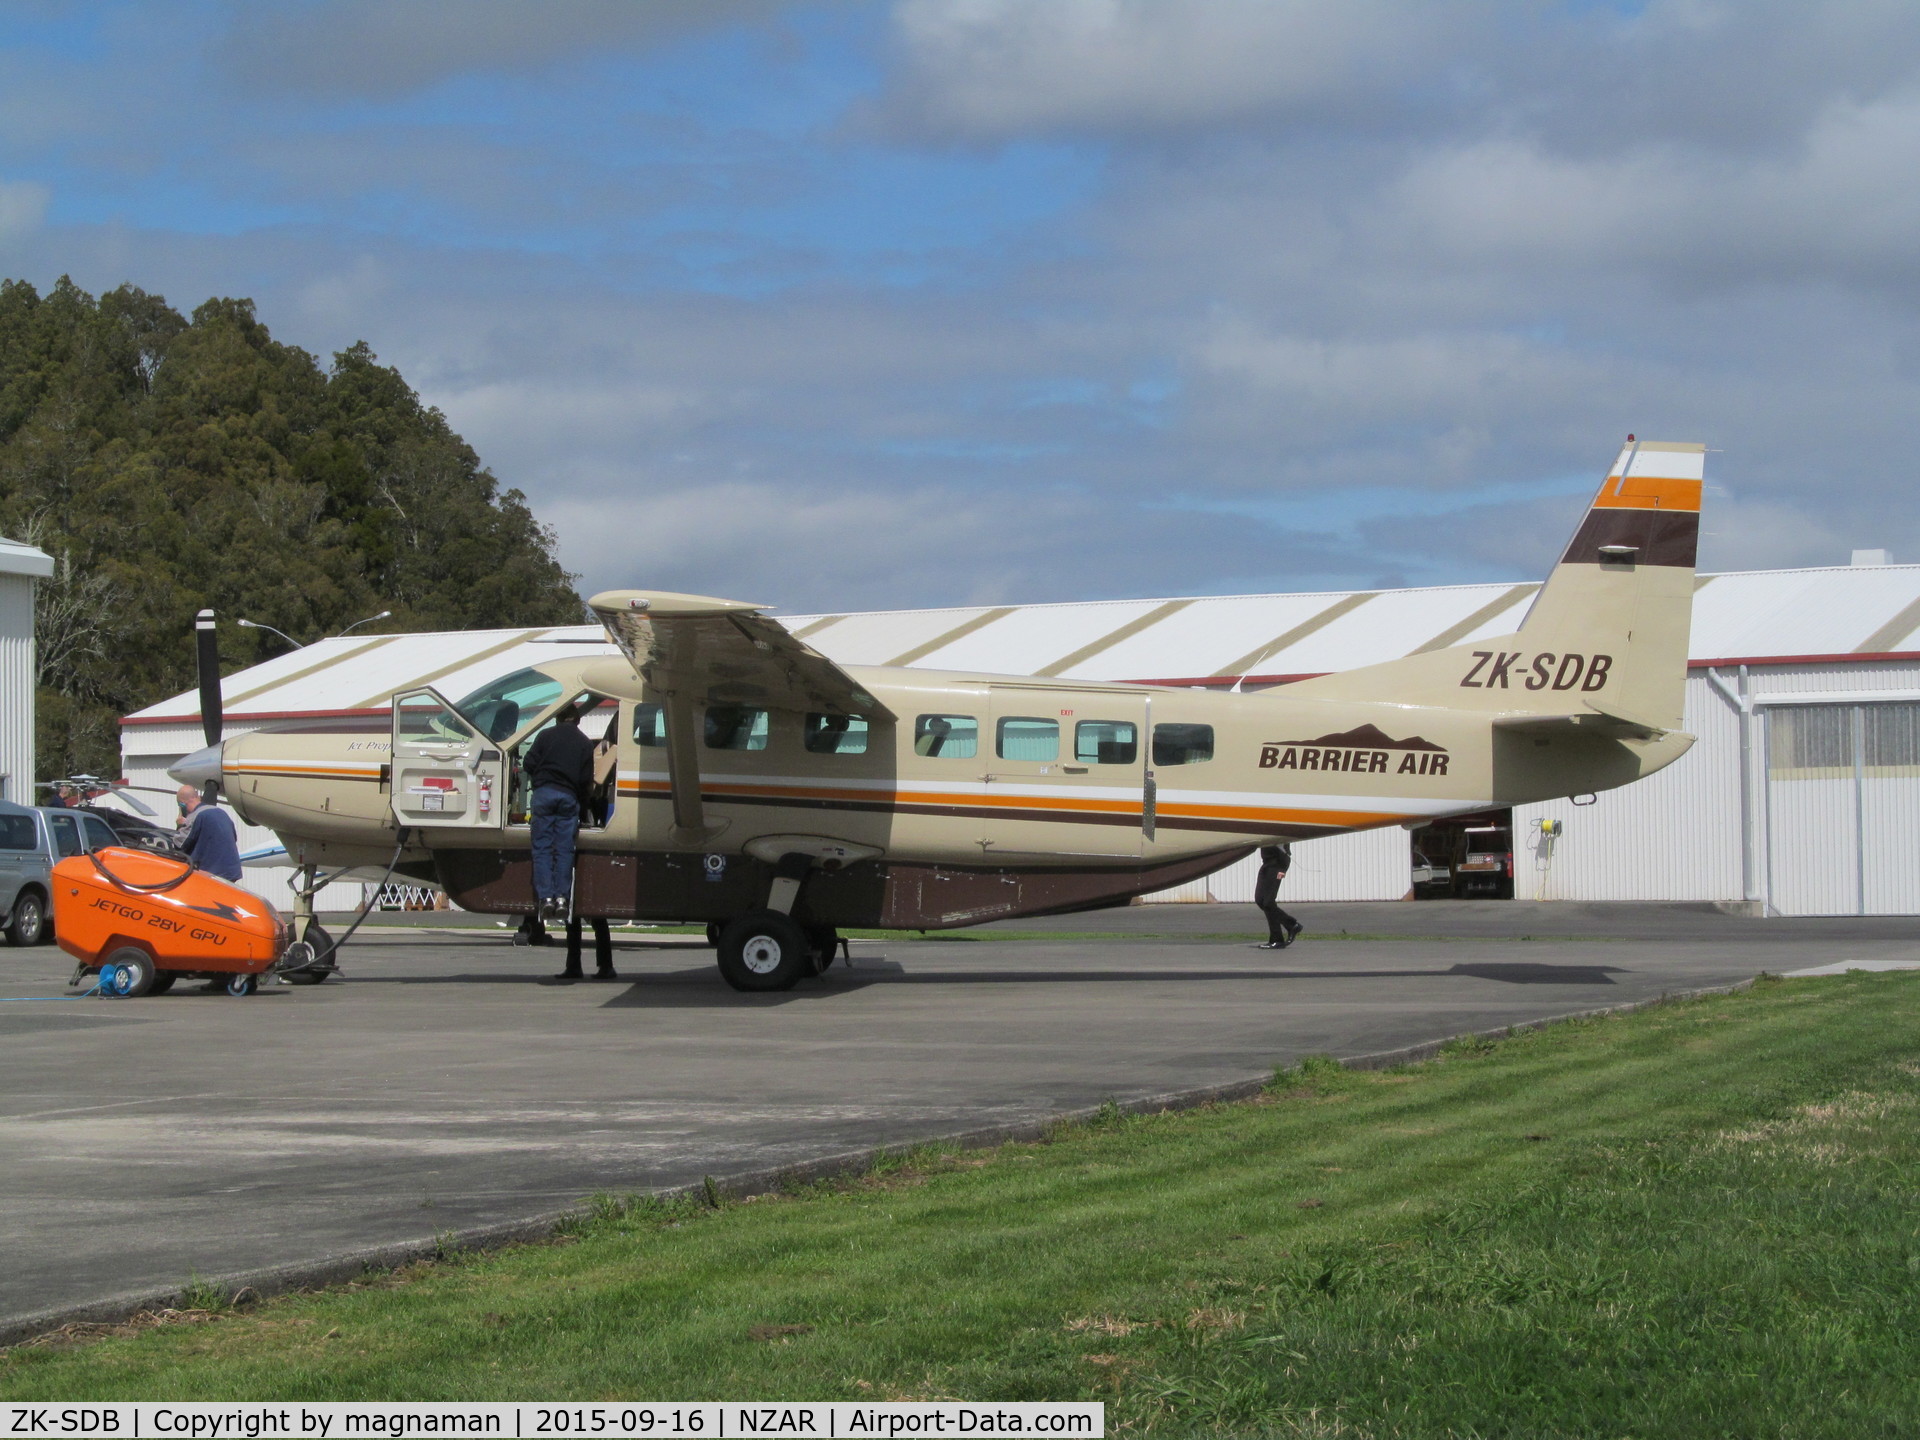 ZK-SDB, 2009 Cessna 208B Grand Caravan C/N 208B2089, battery check? left shortly after this photo was taken.